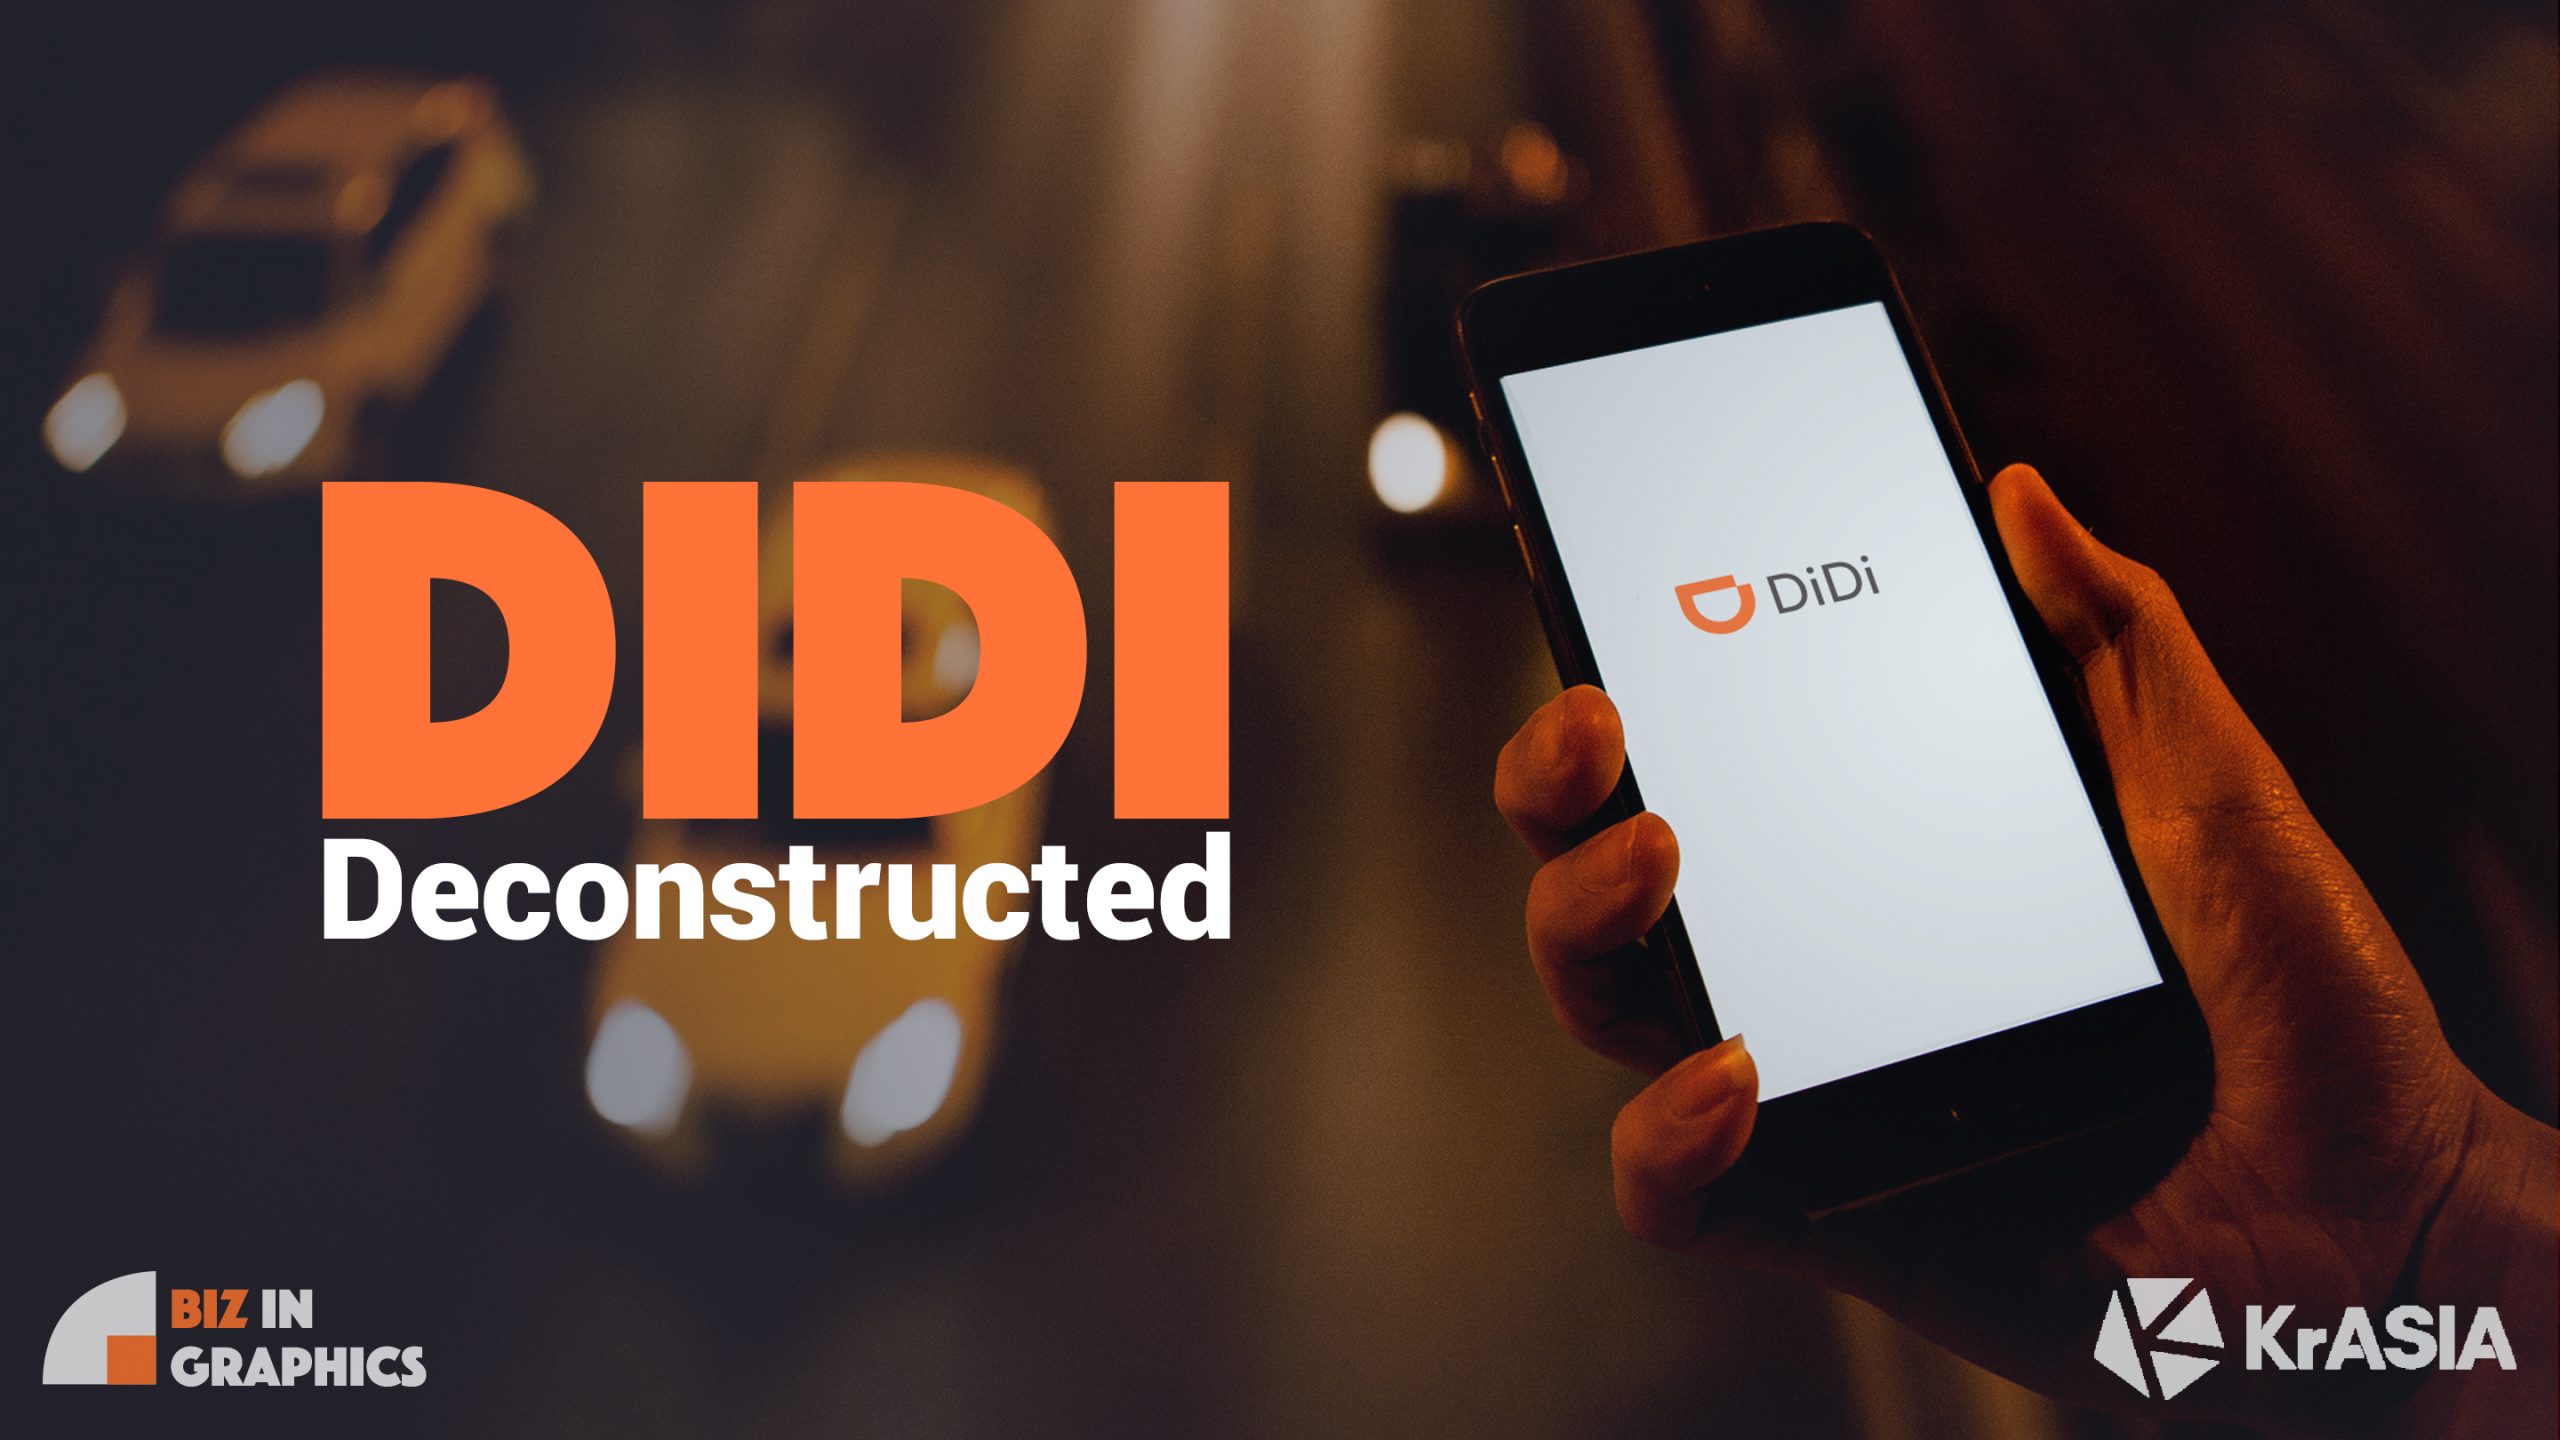 BIZ IN GRAPHICS | Didi shows ambitions with 800 million monthly users target